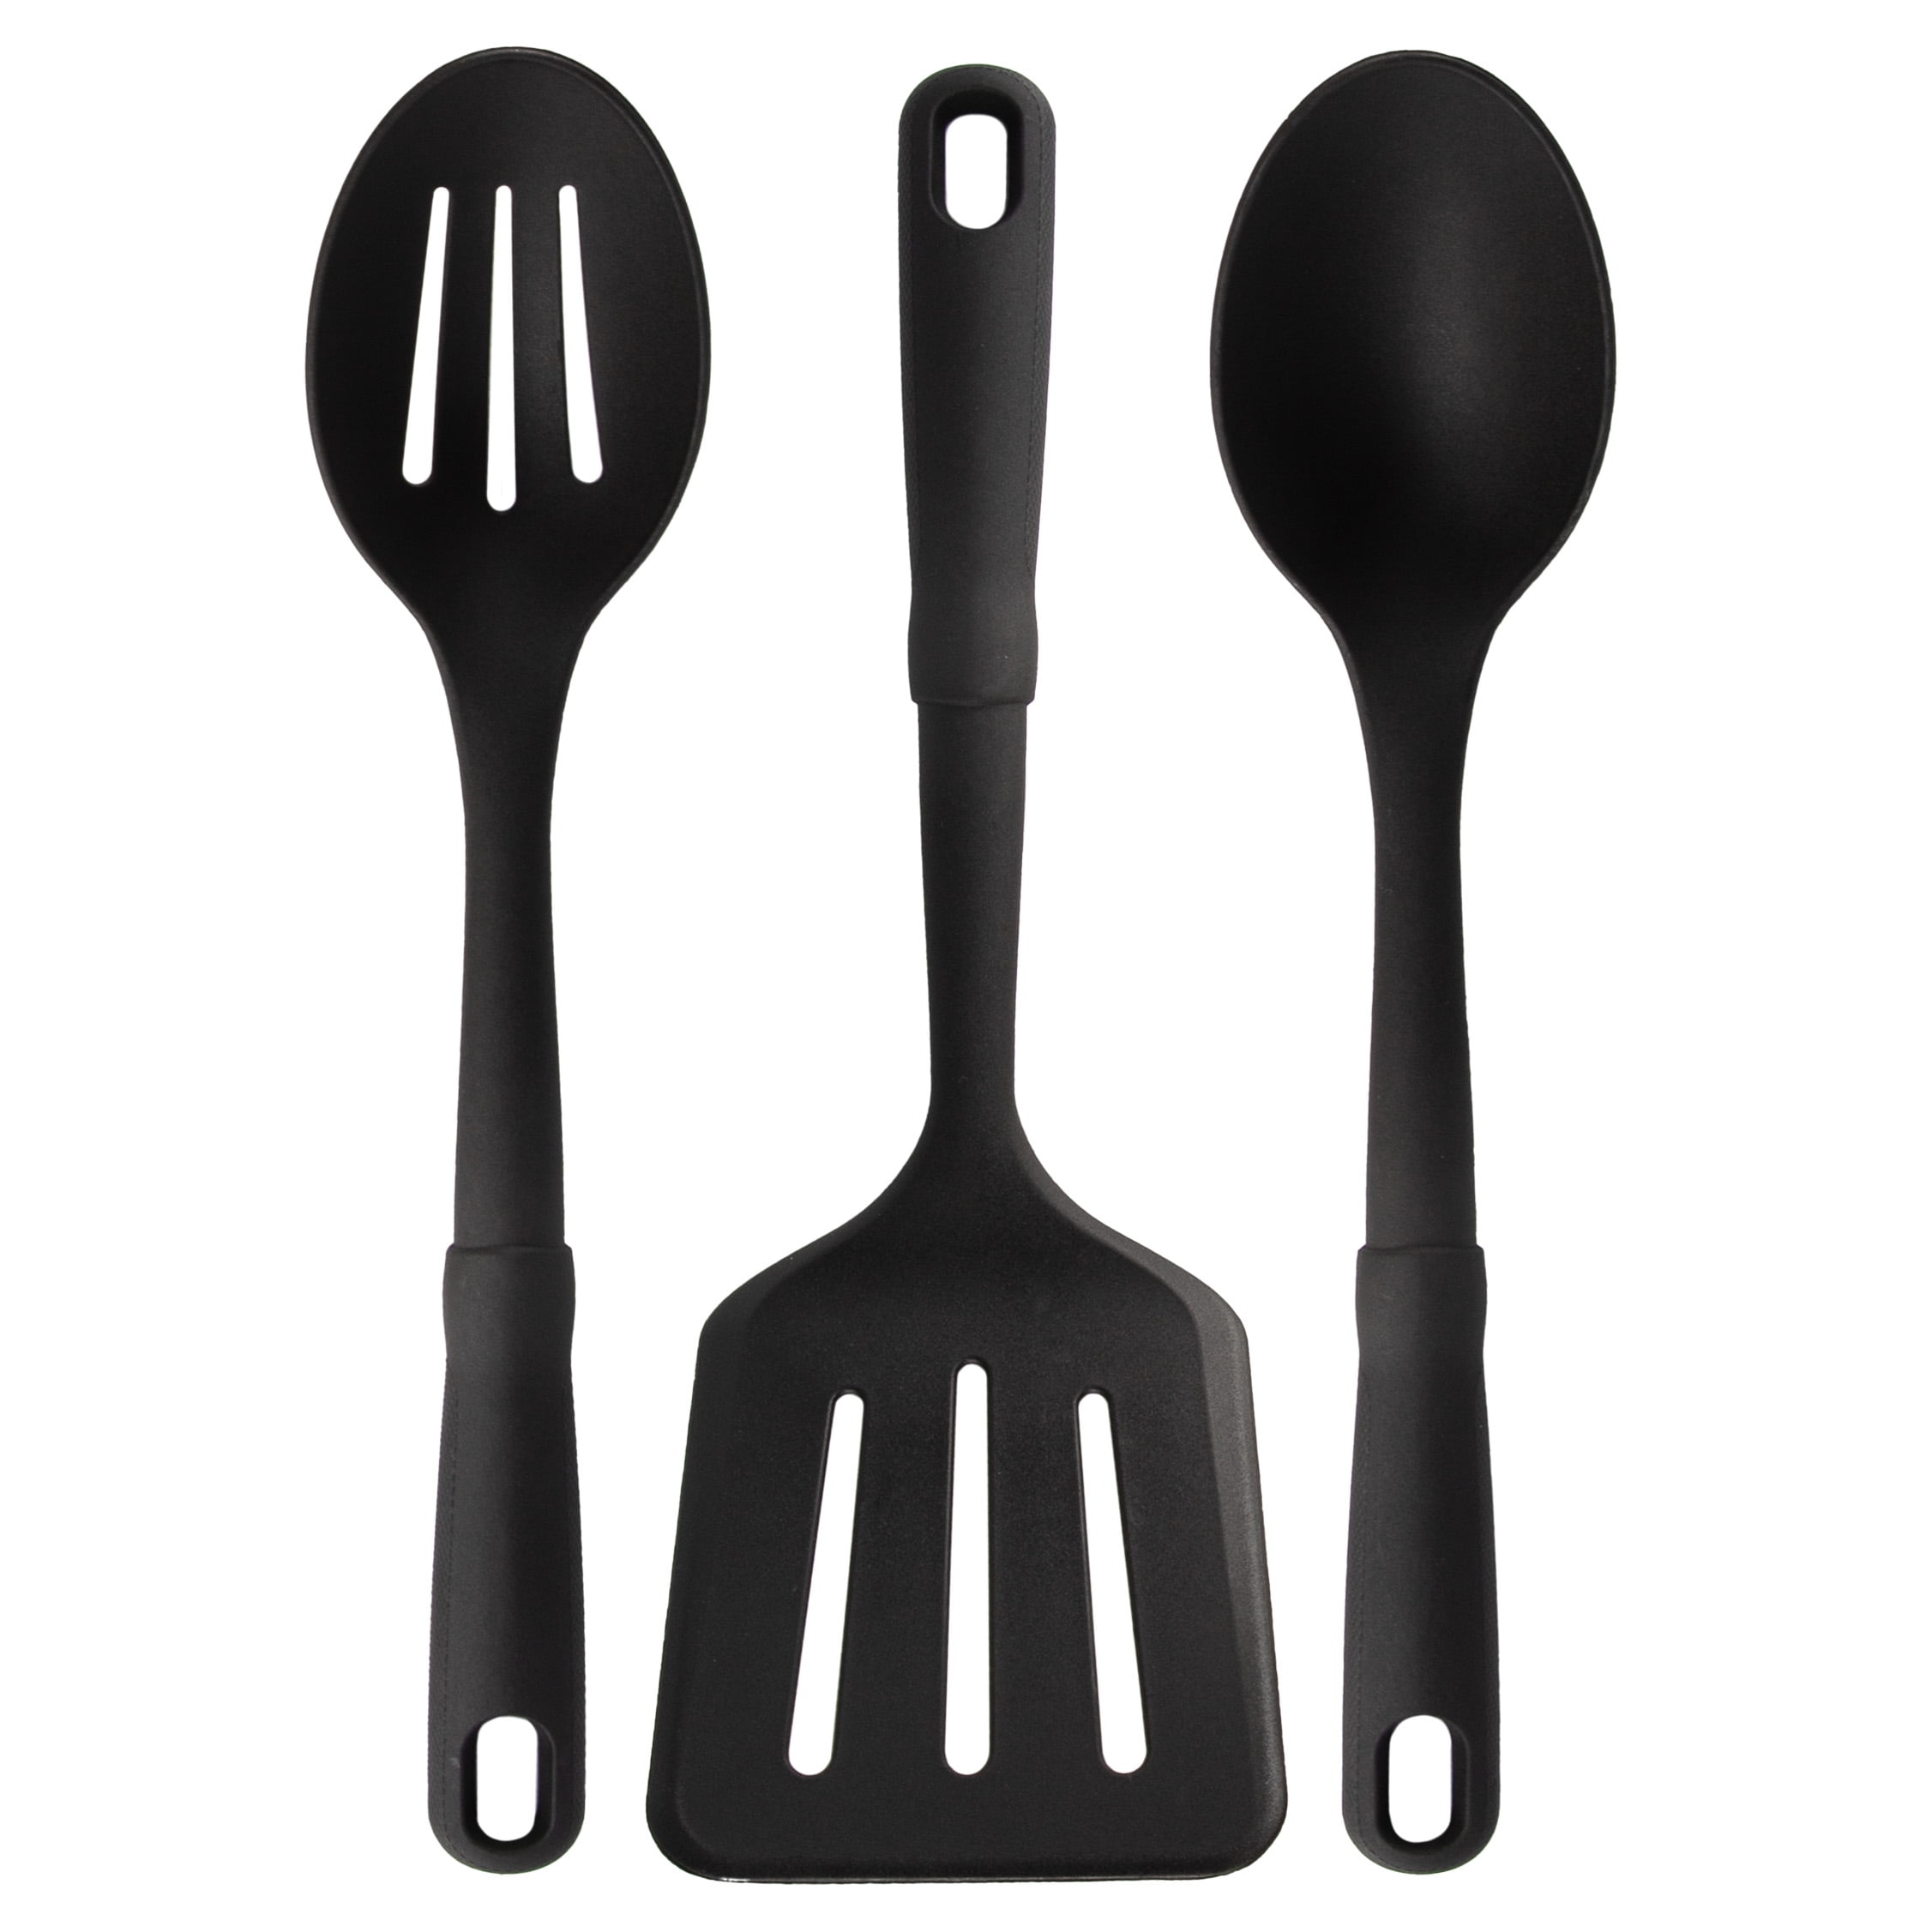 Akurn 3-piece Kitchen Utensil Set, Plastic Cooking Set Includes  Cooking/Serving Spoon, Slotted Turner/Flipper and Serving Fork, 10-inch  Cooking